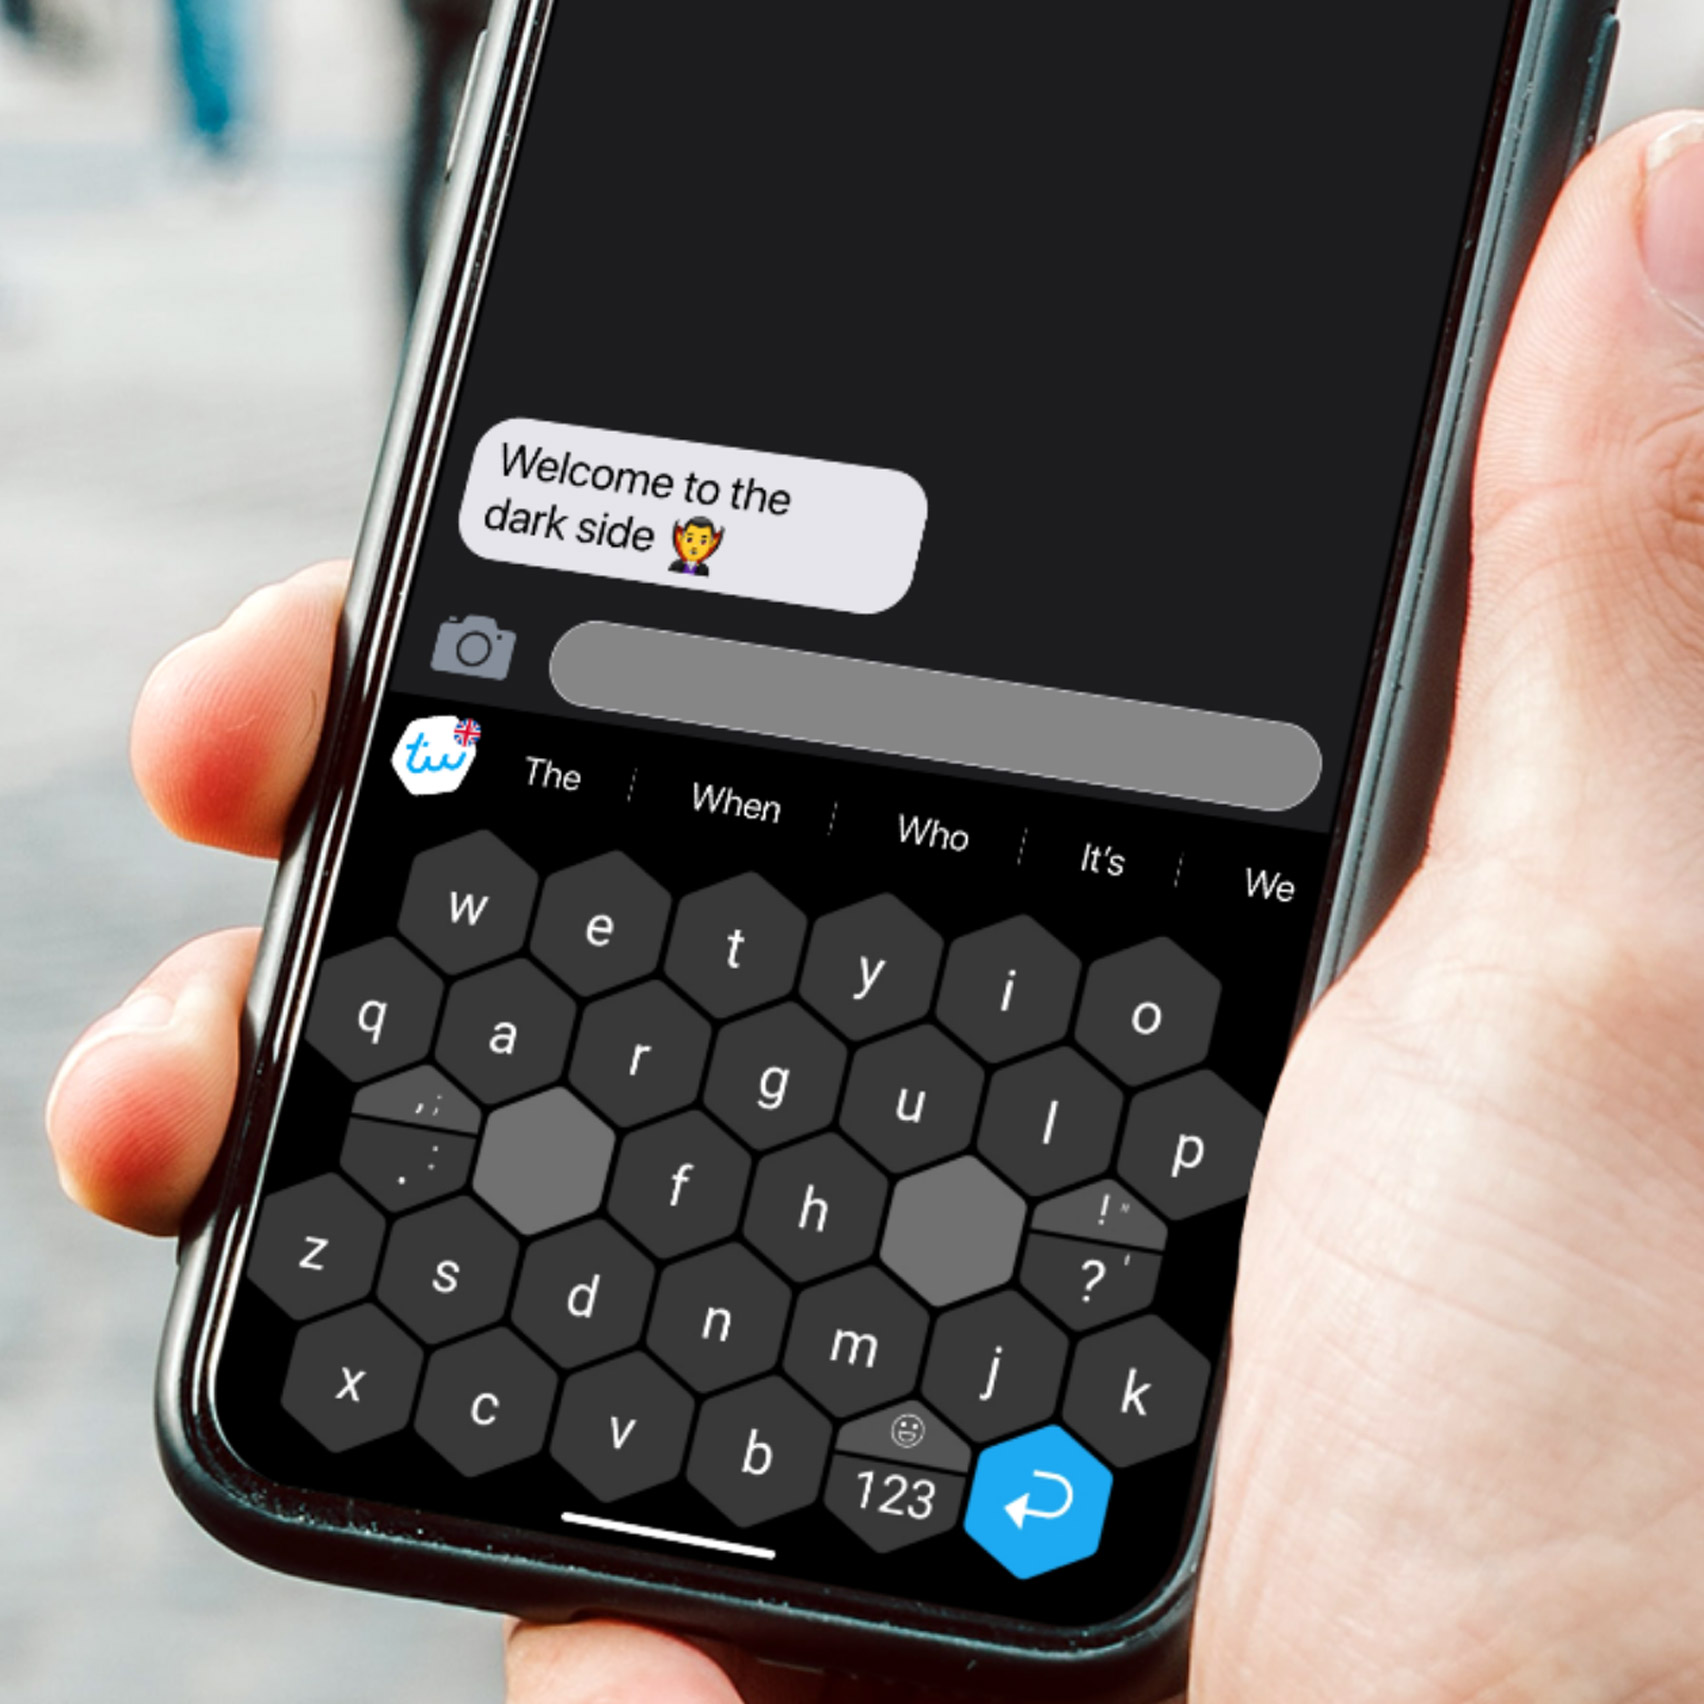 keyboard uses artificial intelligence to improve smartphone typing